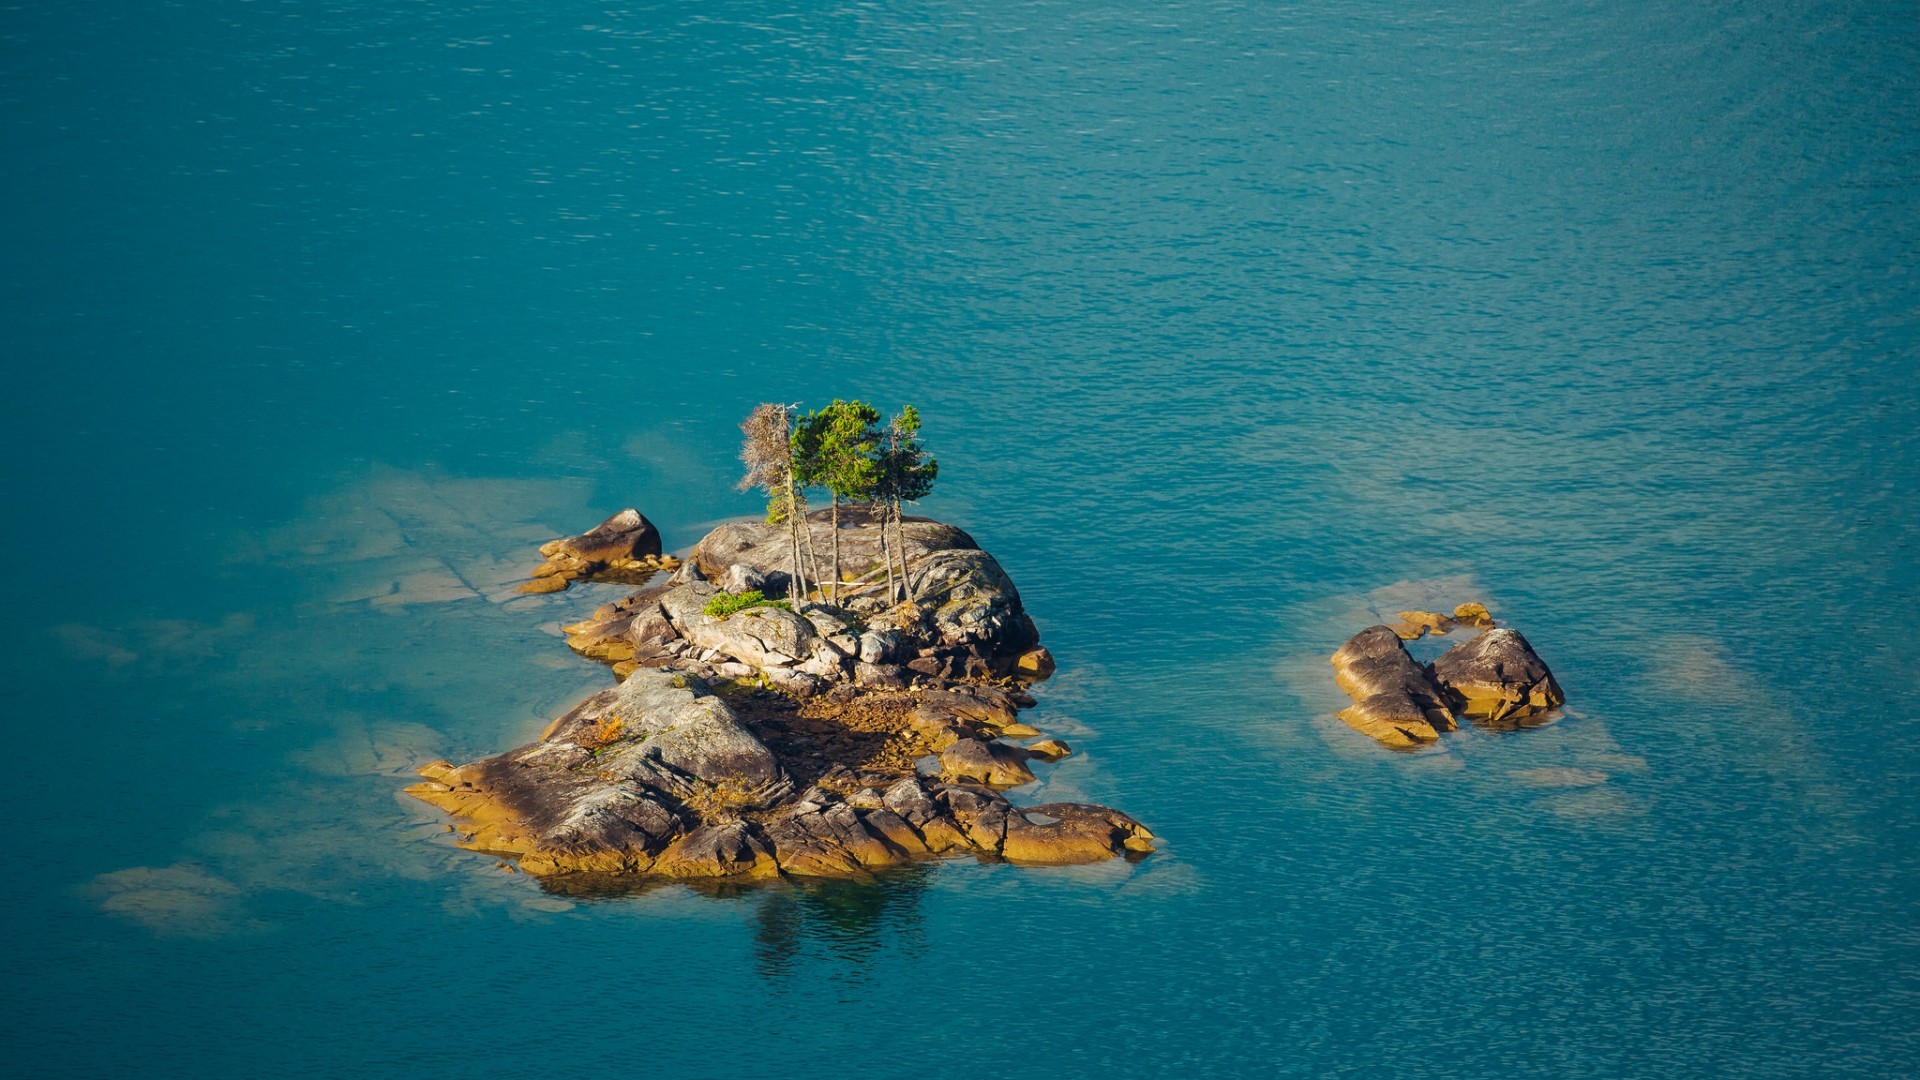 General 1920x1080 nature landscape rocks water trees island sea aerial view reflection blue